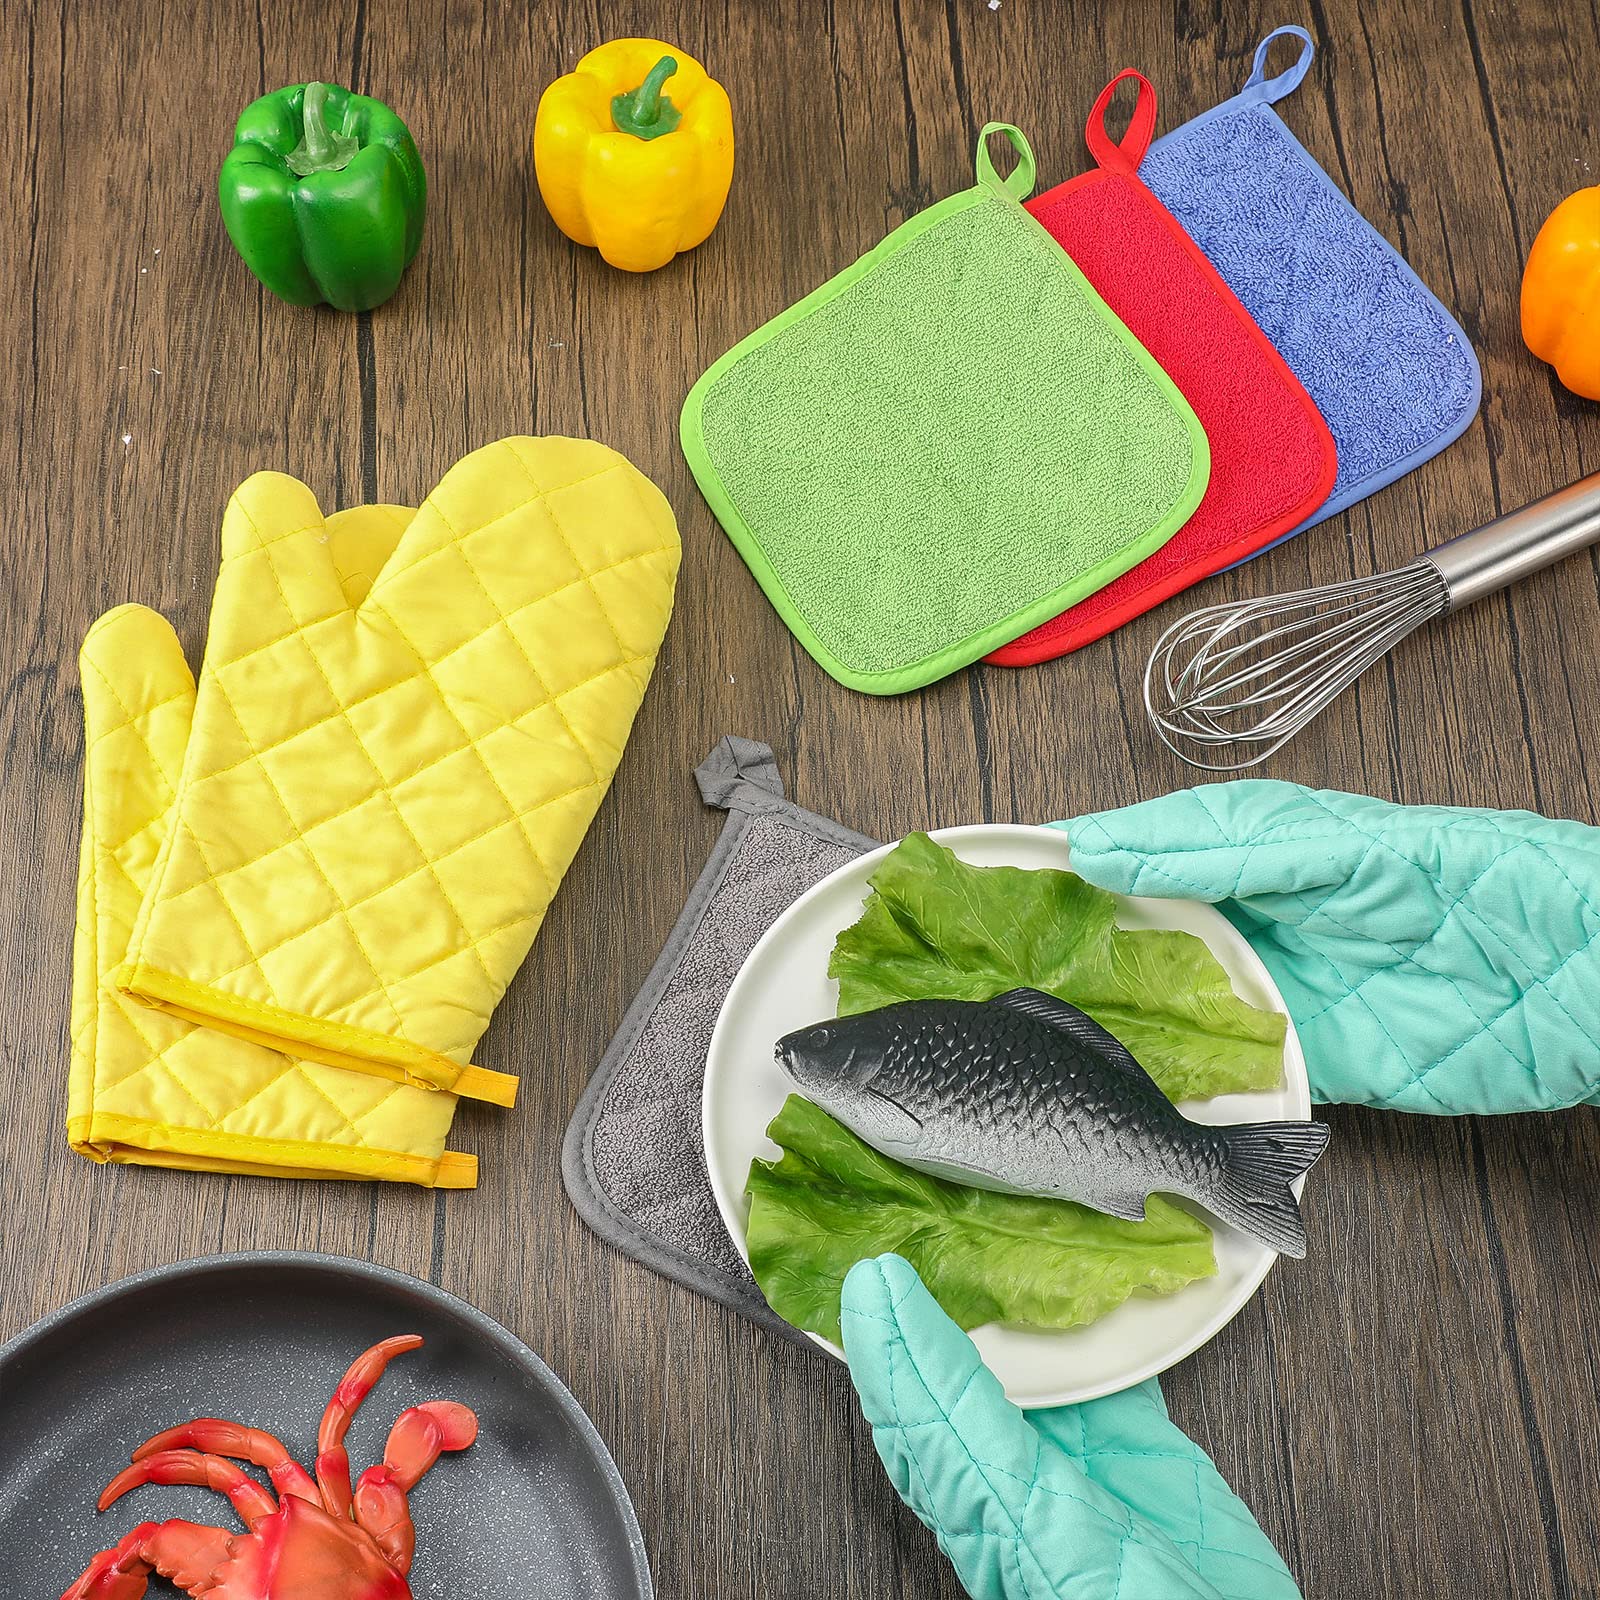 Zubebe 12 Pcs Oven Mitts and Pot Holders Multicolor Sets 6 Pair Heat Resistant Cotton Oven Gloves Extra Thicken Long Kitchen Gloves 6 Terry Cloth Pot Holders Oven Hot Pads for Cooking Baking Grilling